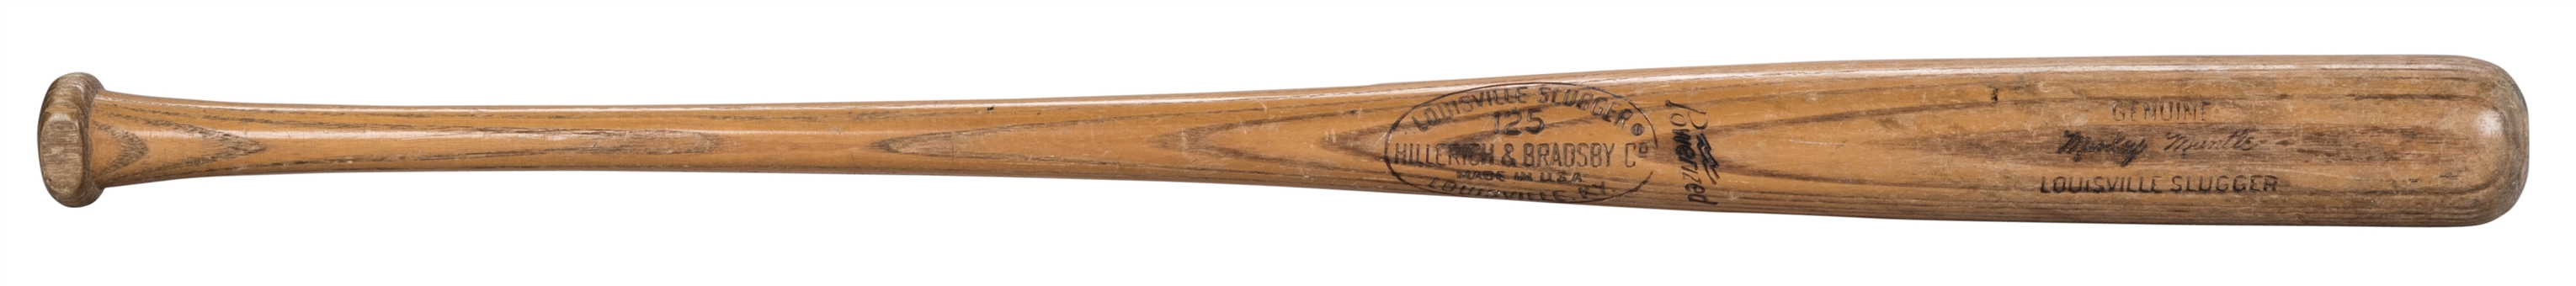 1965-68 Mickey Mantle Hillerich & Bradsby M110 Game Used Professional Model Bat Including Post Acquisition Use (PSA/DNA)